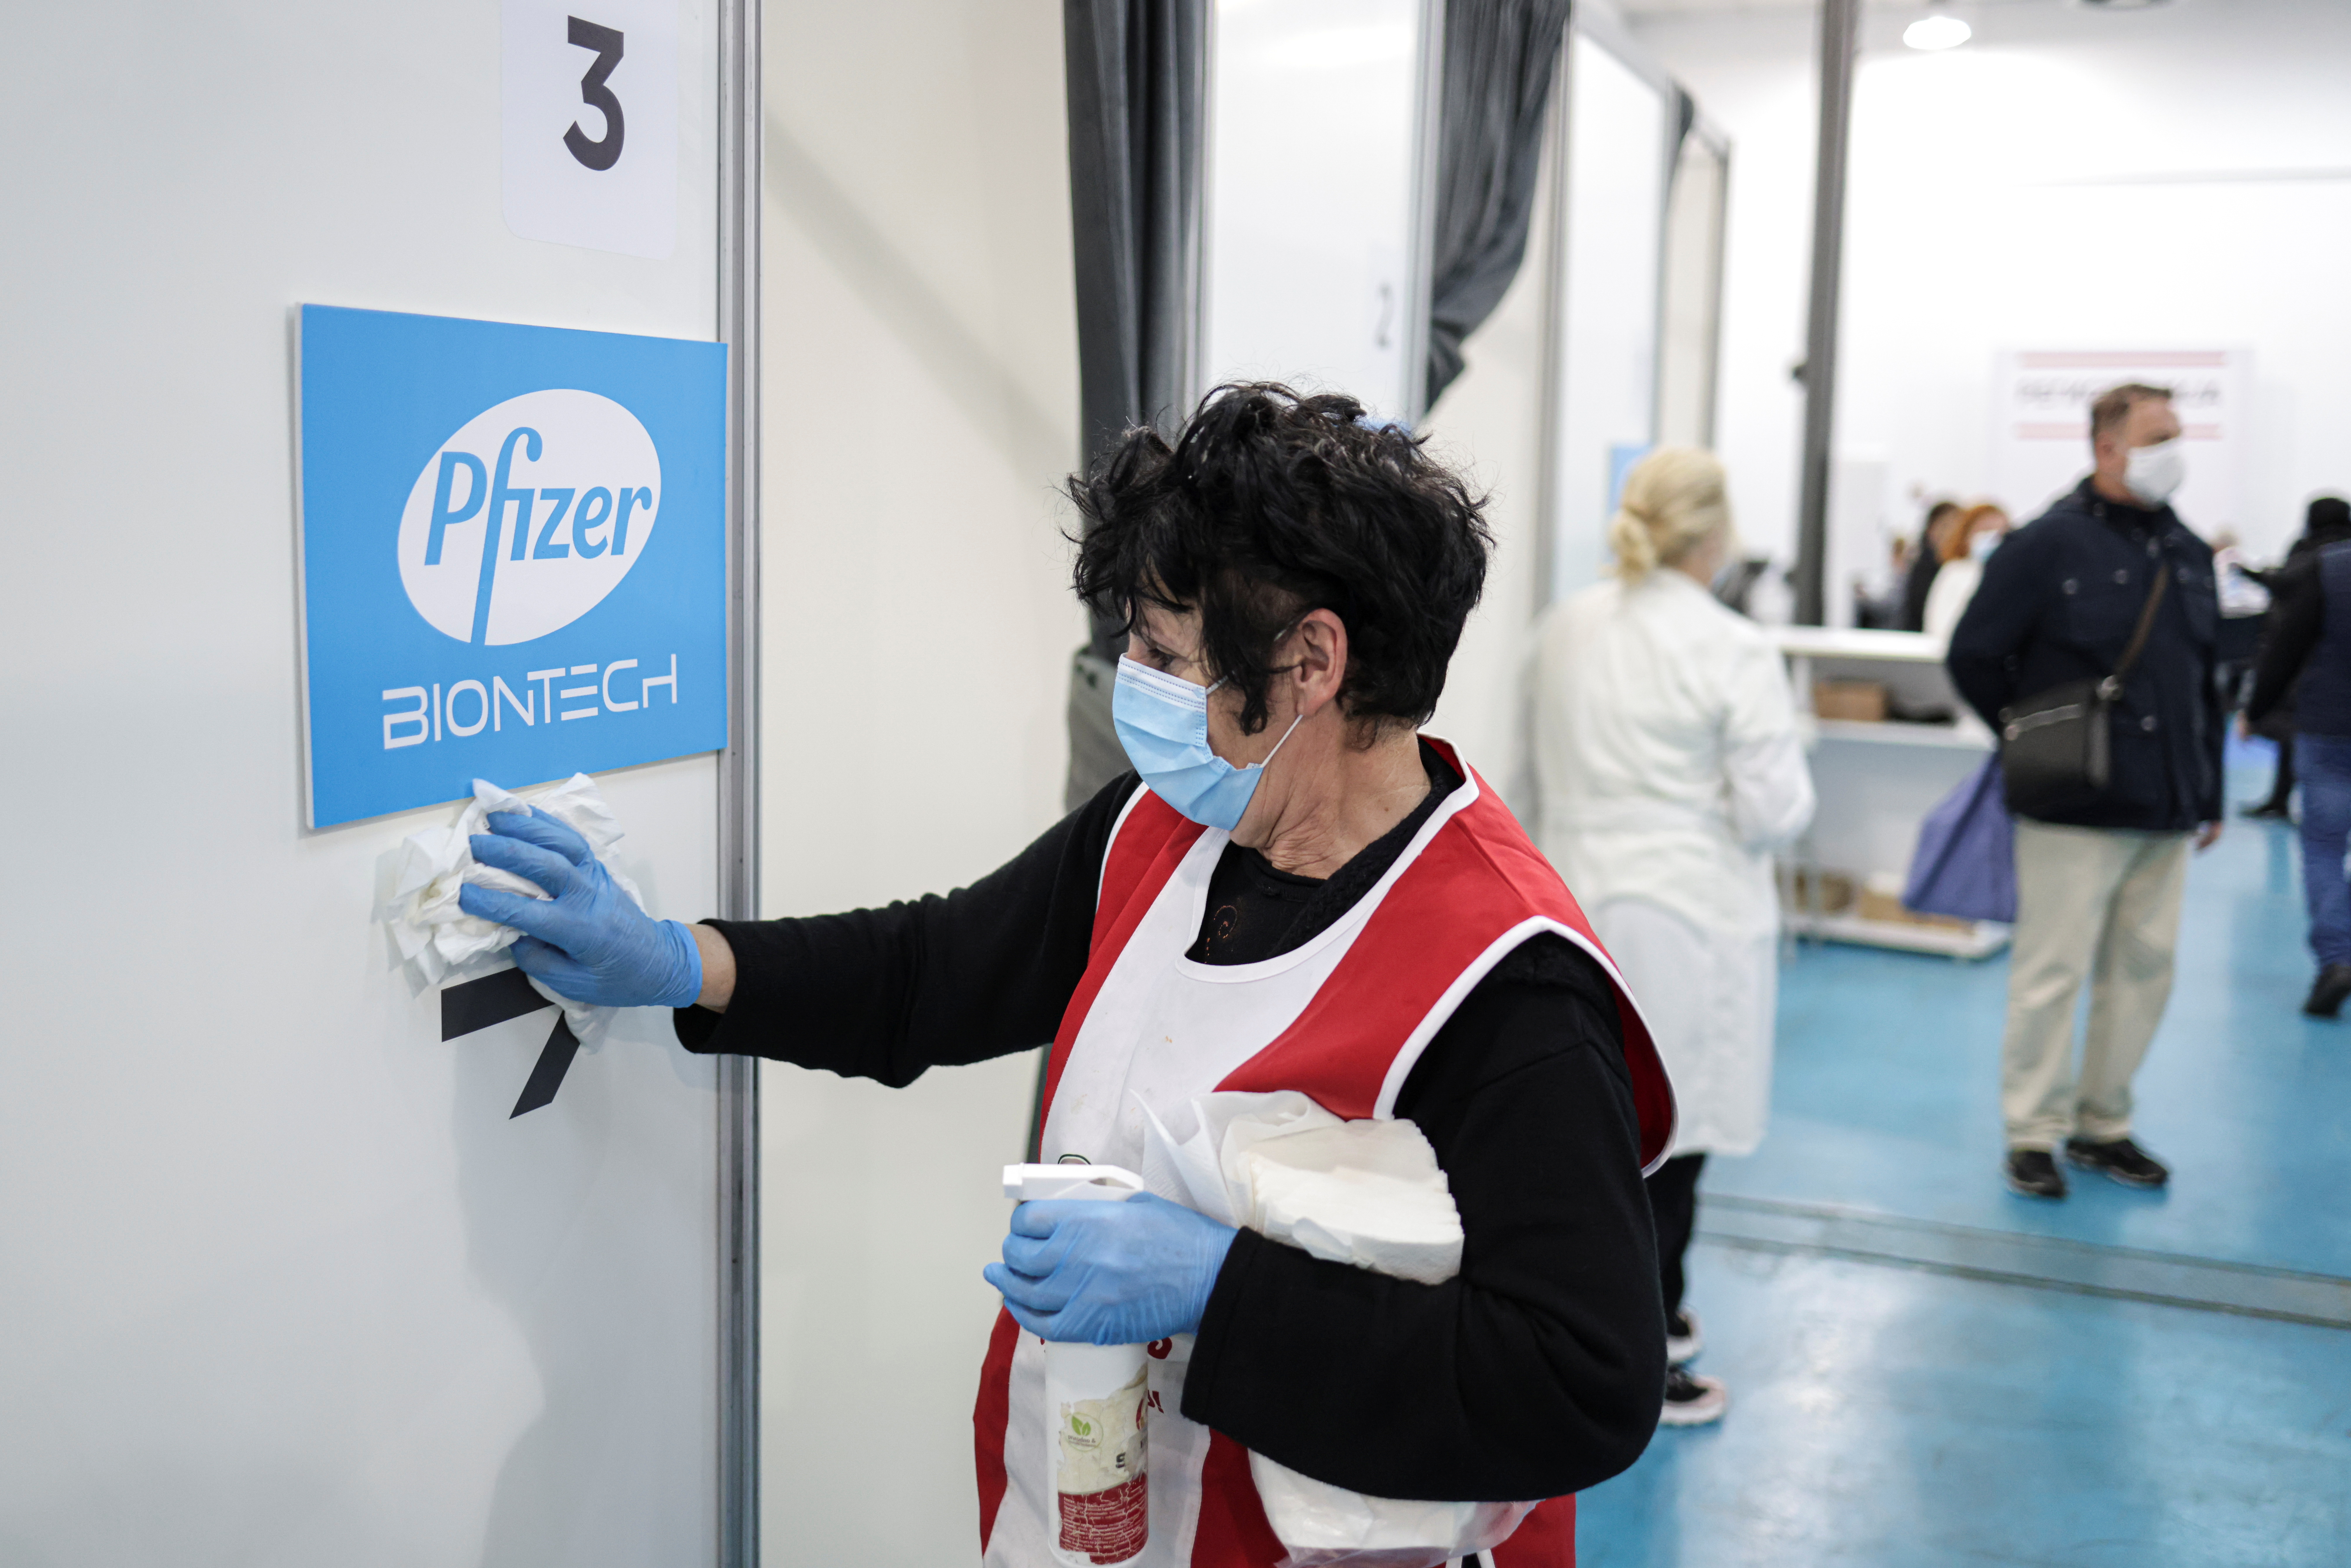 A healthcare worker disinfects a booth where people receive doses of Pfizer's coronavirus disease (COVID-19) vaccine at Belgrade Fair vaccination center in Belgrade, Serbia, October 15, 2021. REUTERS/Marko Djurica